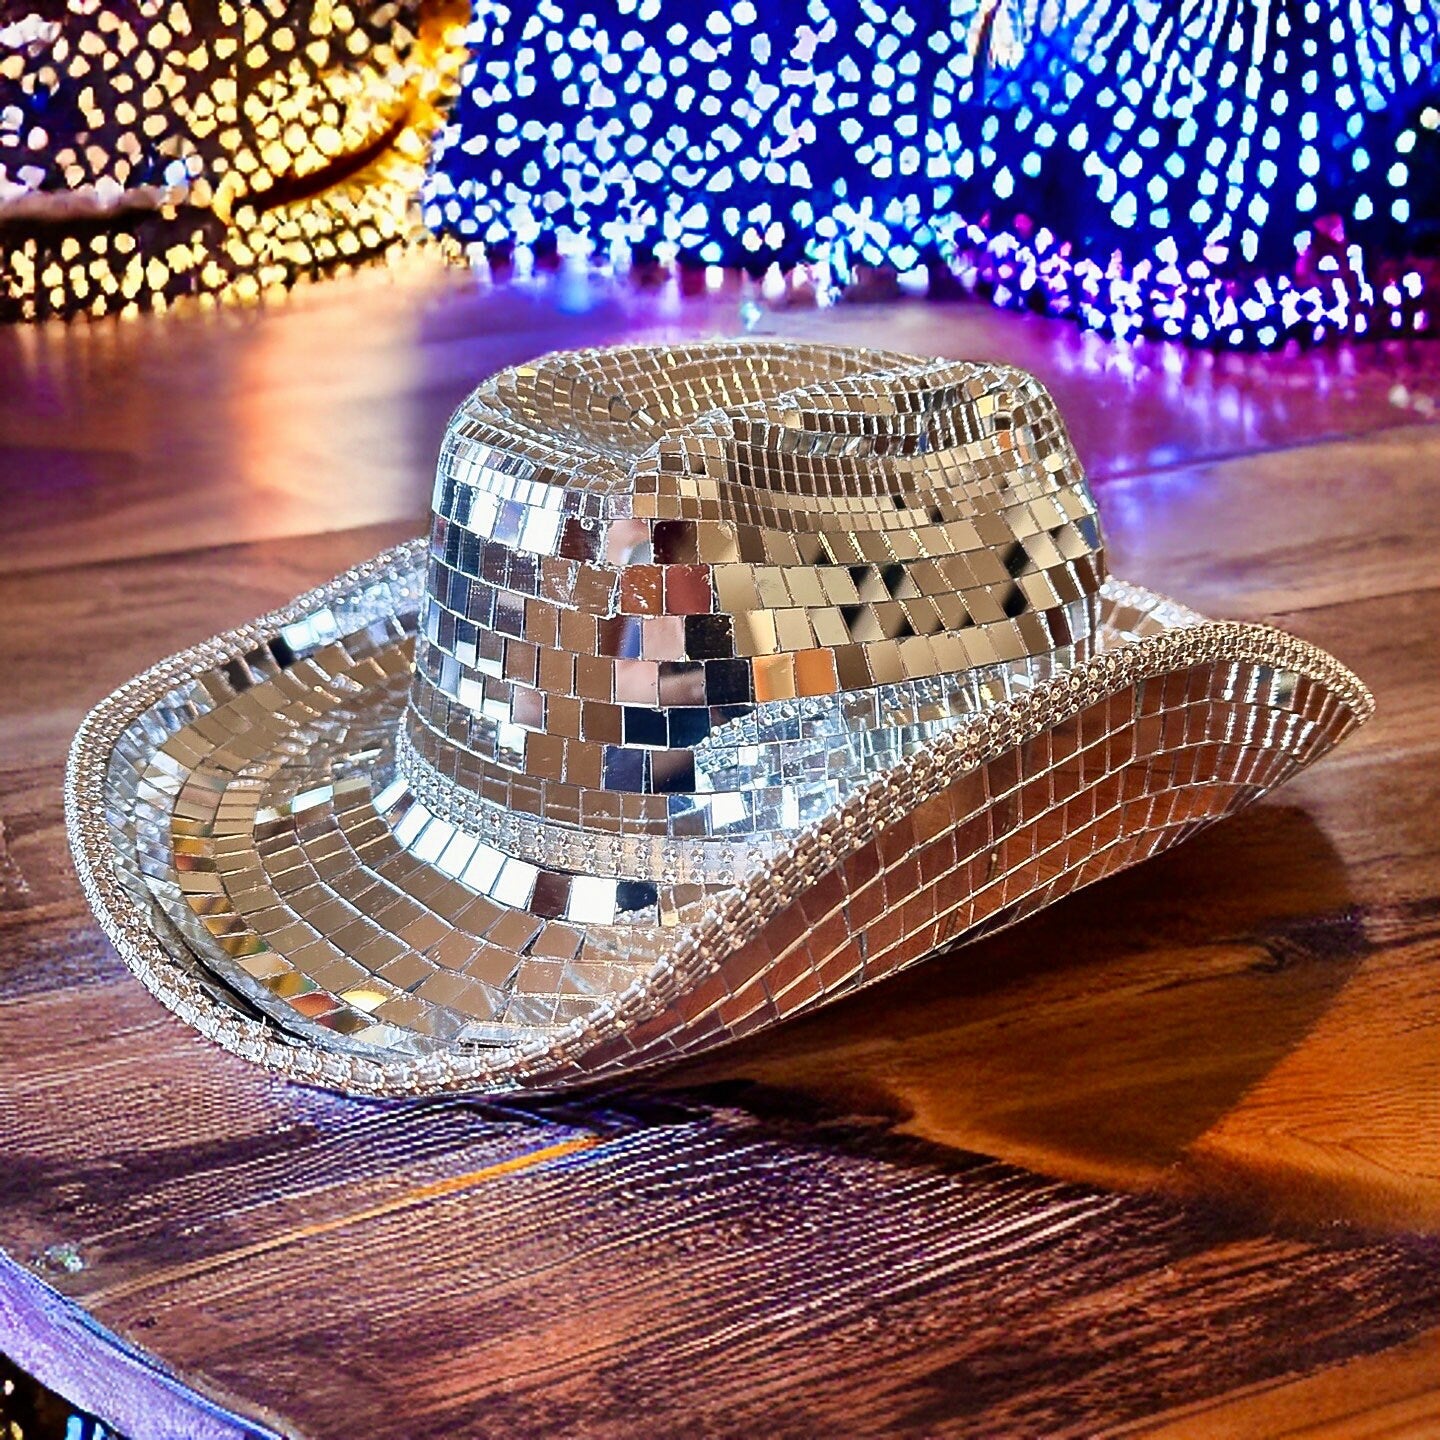 Youngcome Disco Ball Cowboy Hat Classic Disco Ball Festival